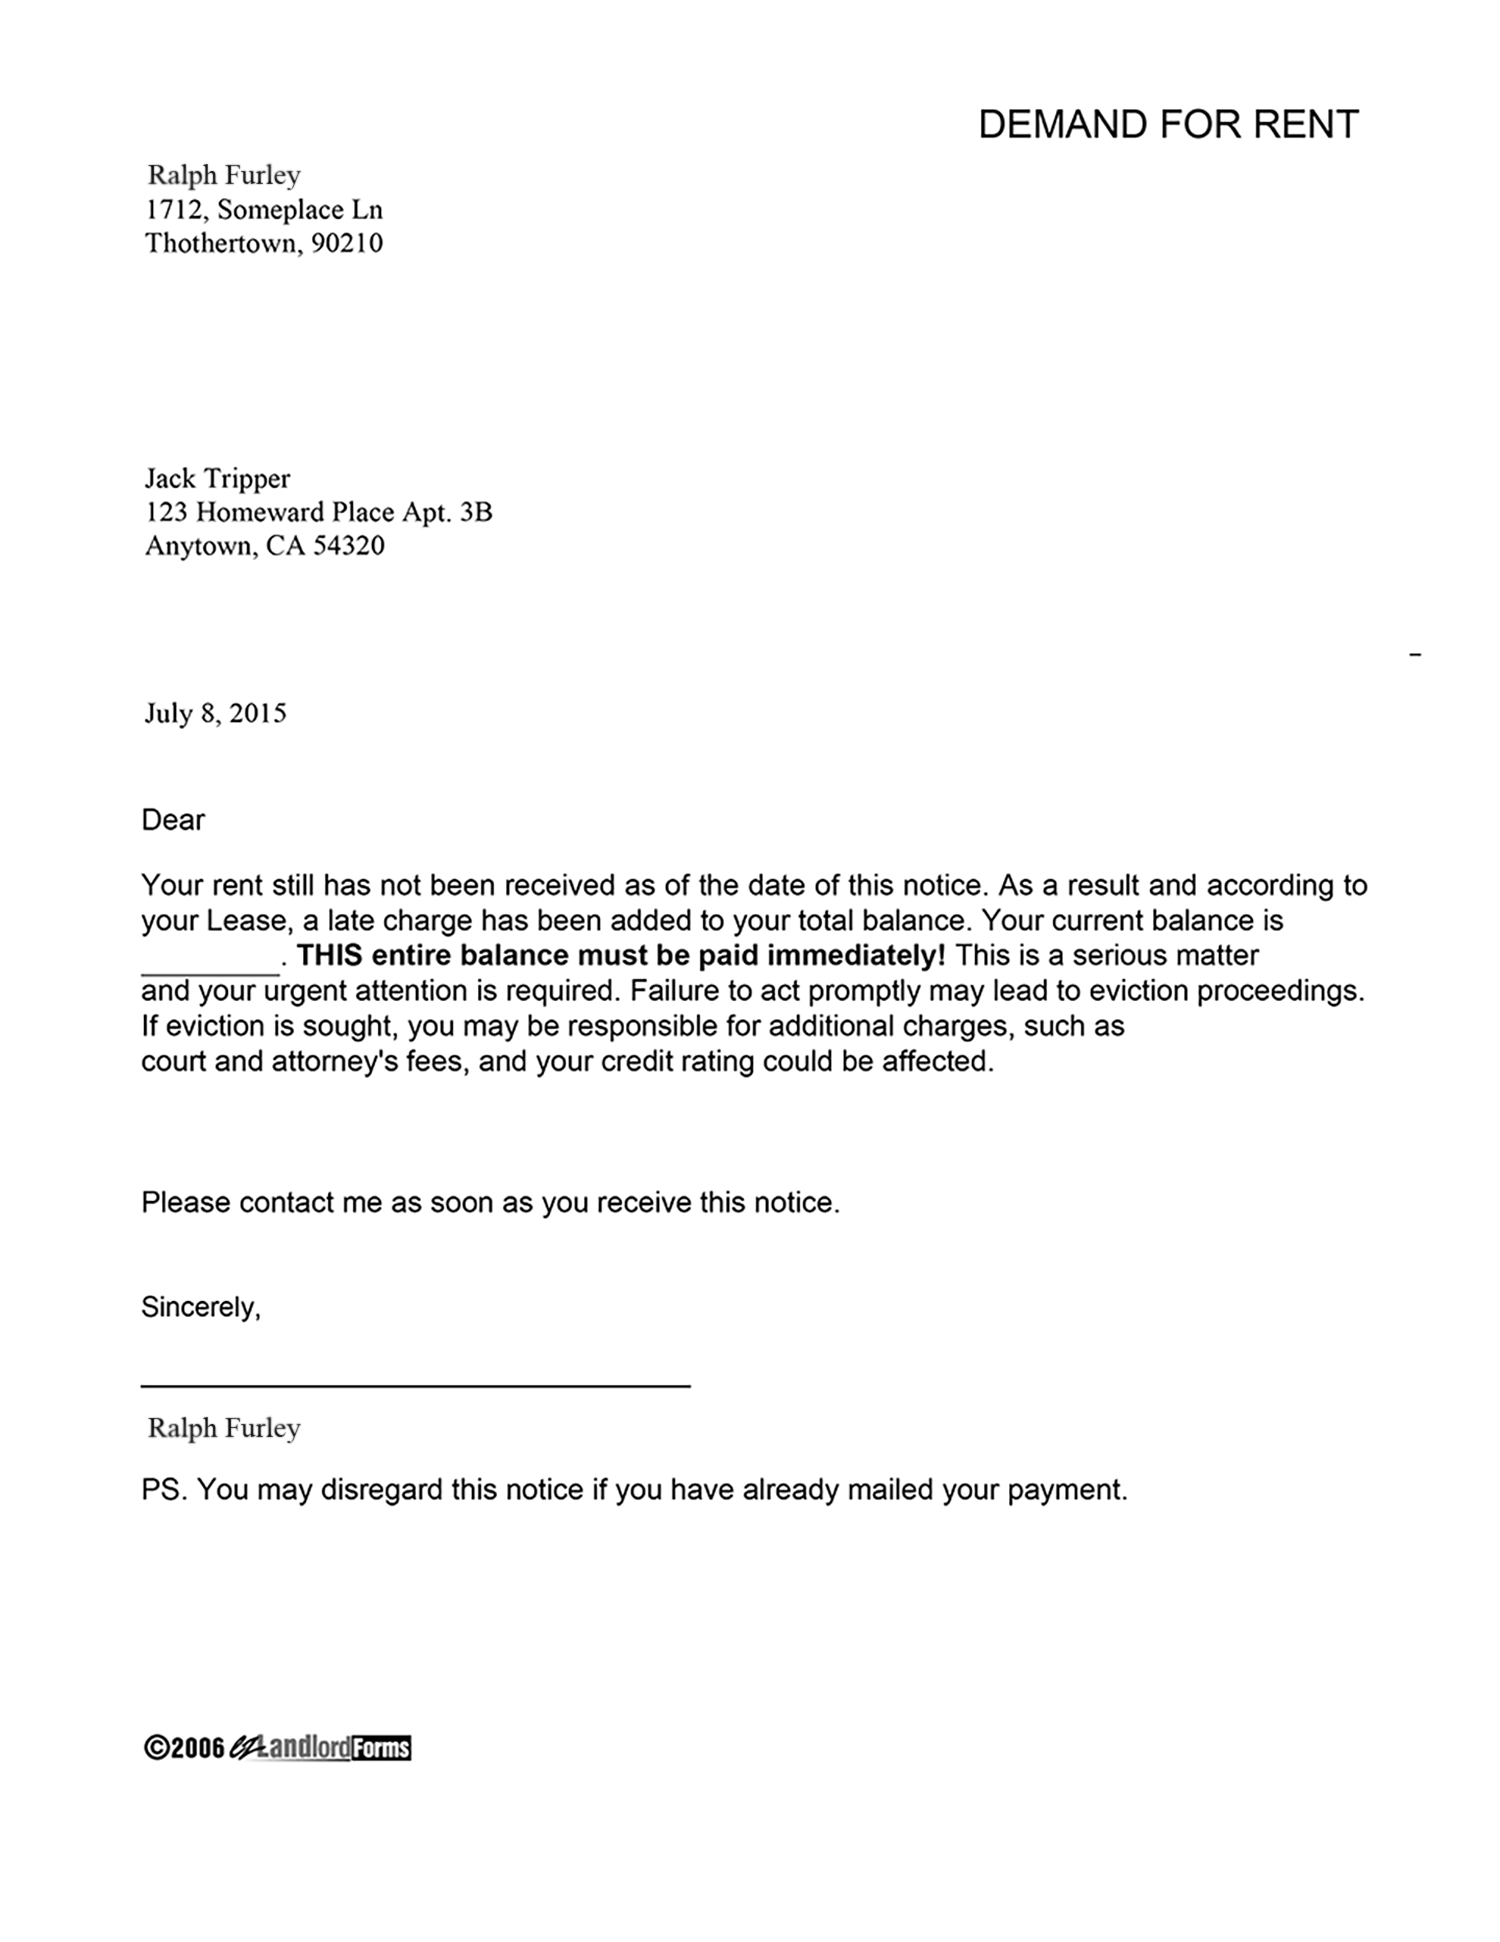 rent-demand-letter-template-for-your-needs